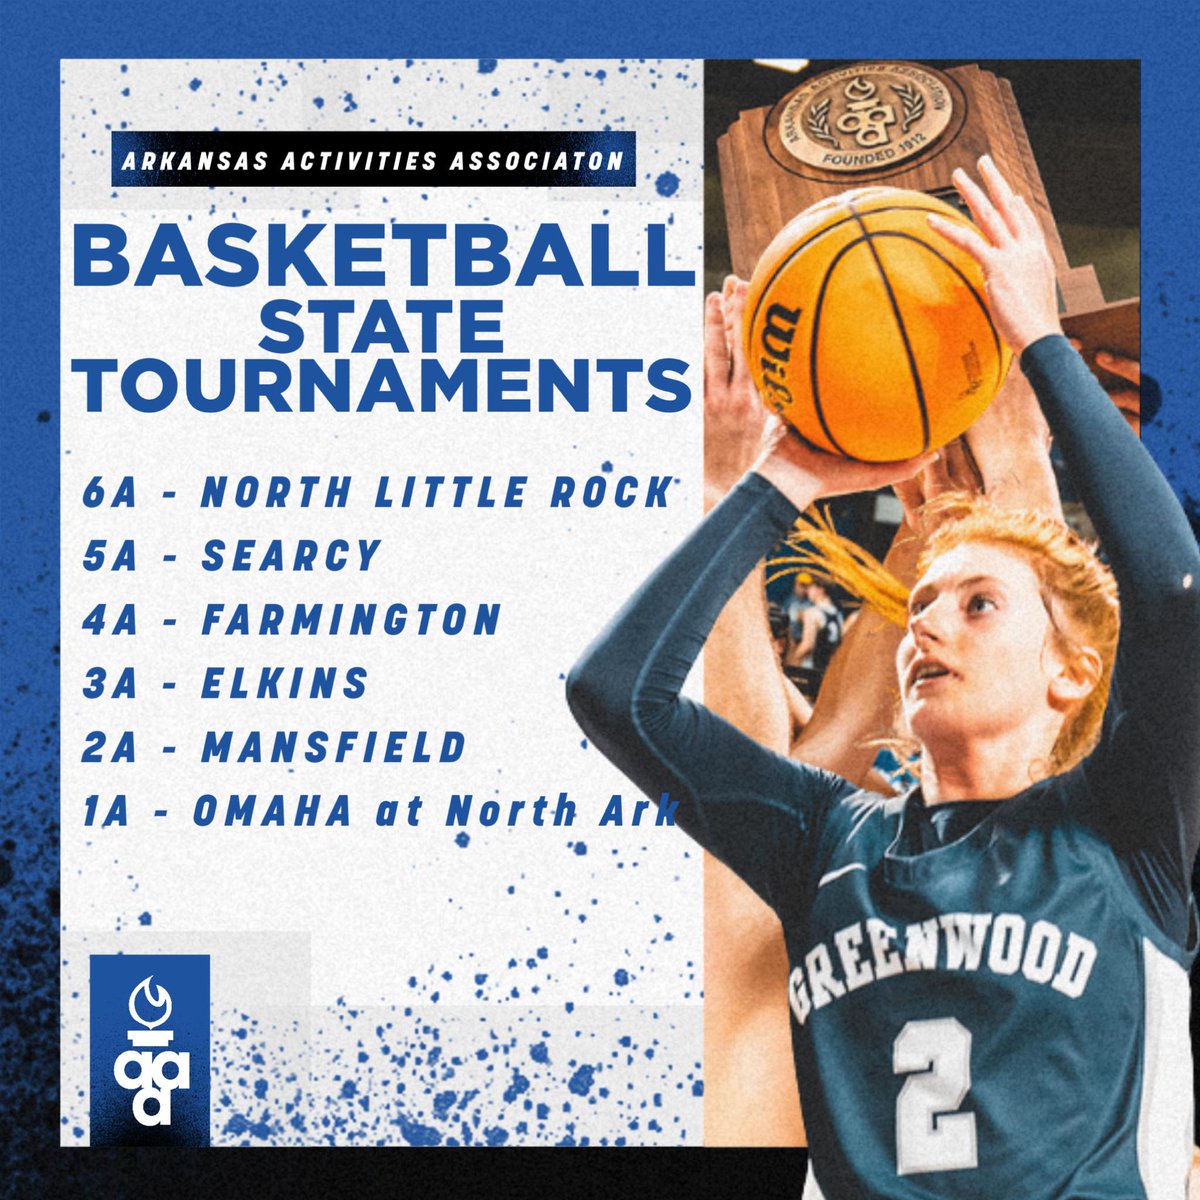 STATE TOURNAMENTS START TODAY! Good luck to the teams competing this week as the march toward a basketball title continues! Games tip at 1pm in 5A, 3A, 2A & 1A and at 4pm in 6A & 4A. Get out and support these student-athletes and coaches! Tickets: gofan.co/app/school/AAA